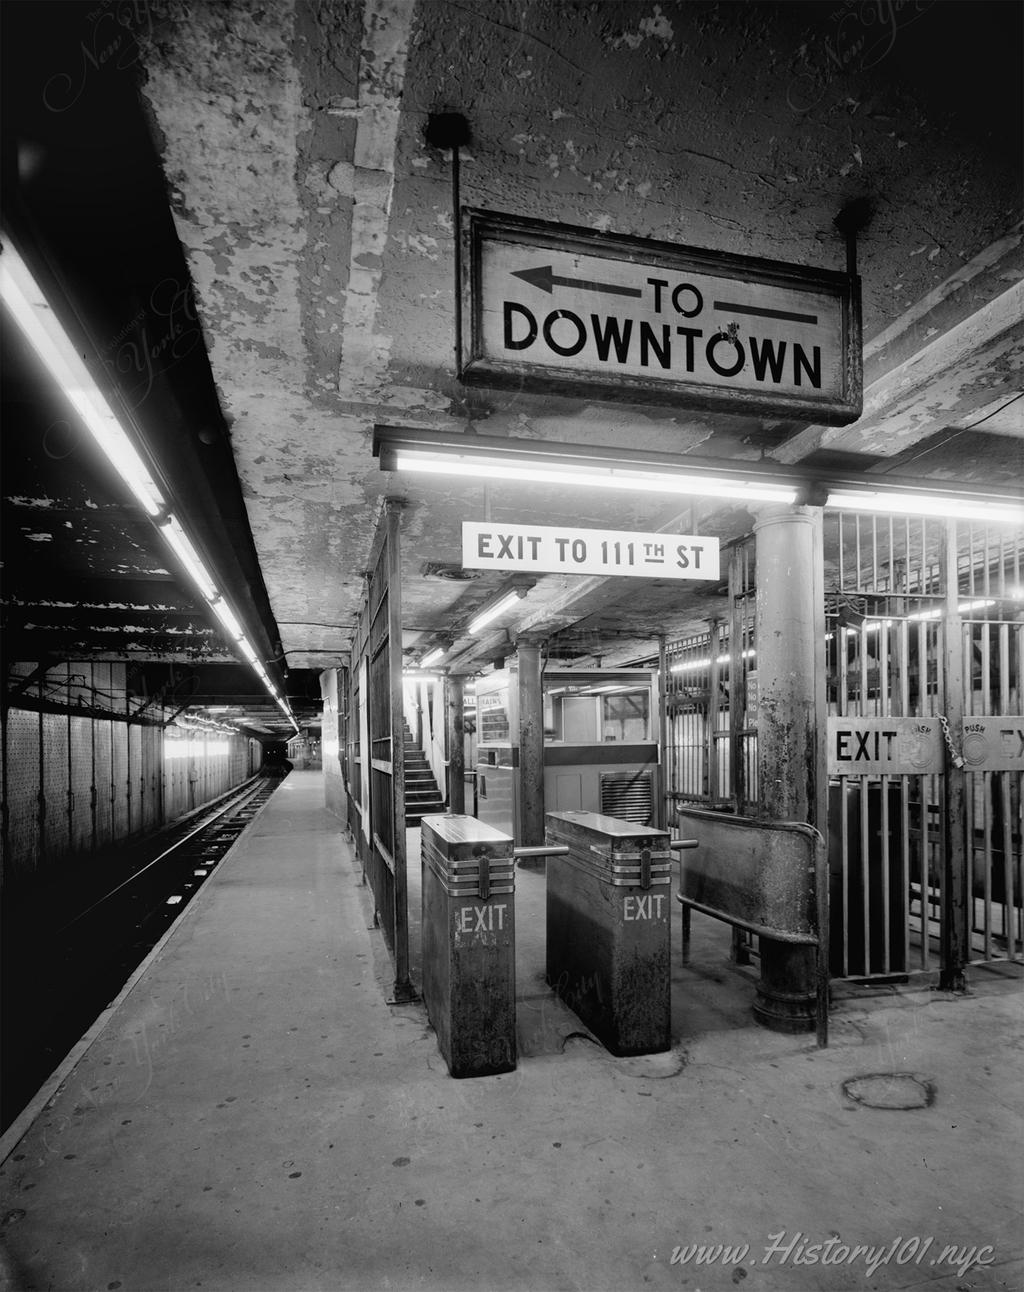 Photograph of the 110th Street and Lenox Avenue Station platform and control area.